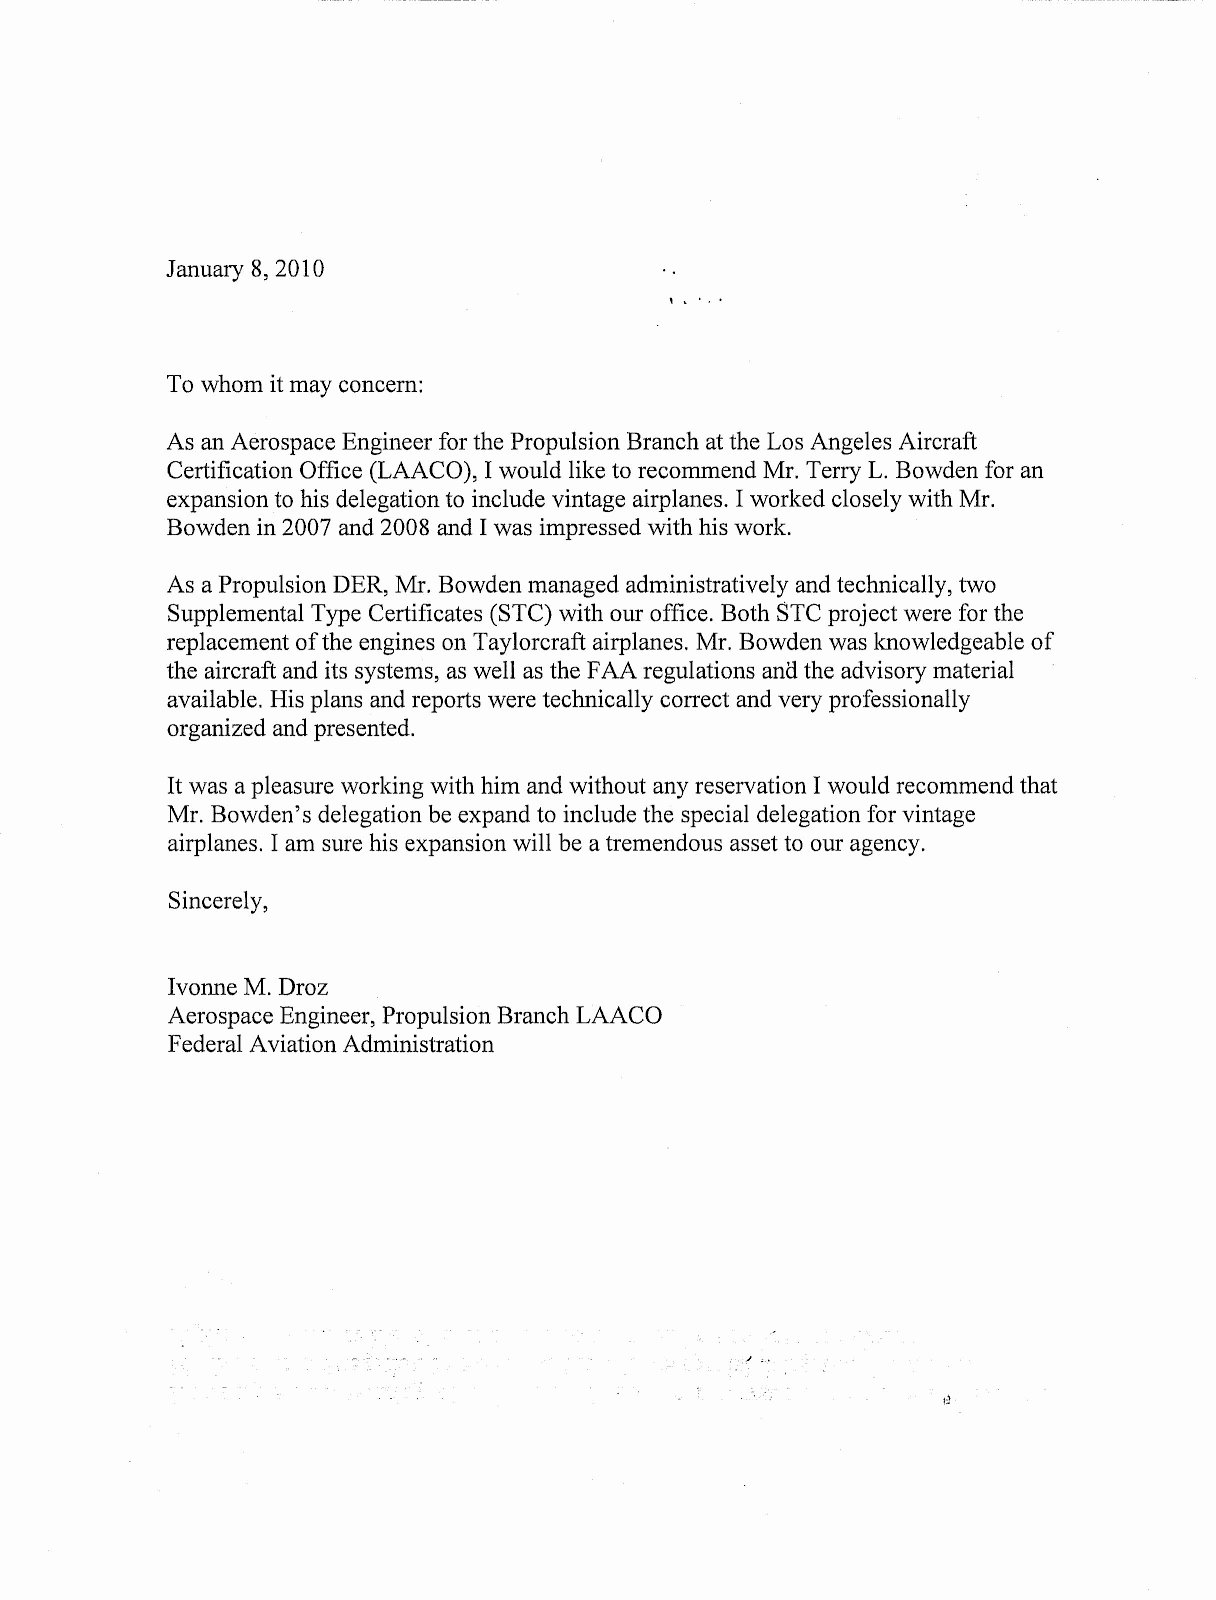 Faa Letter Of Recommendation Sample New Terry Bowden Consultant Der Re Mended